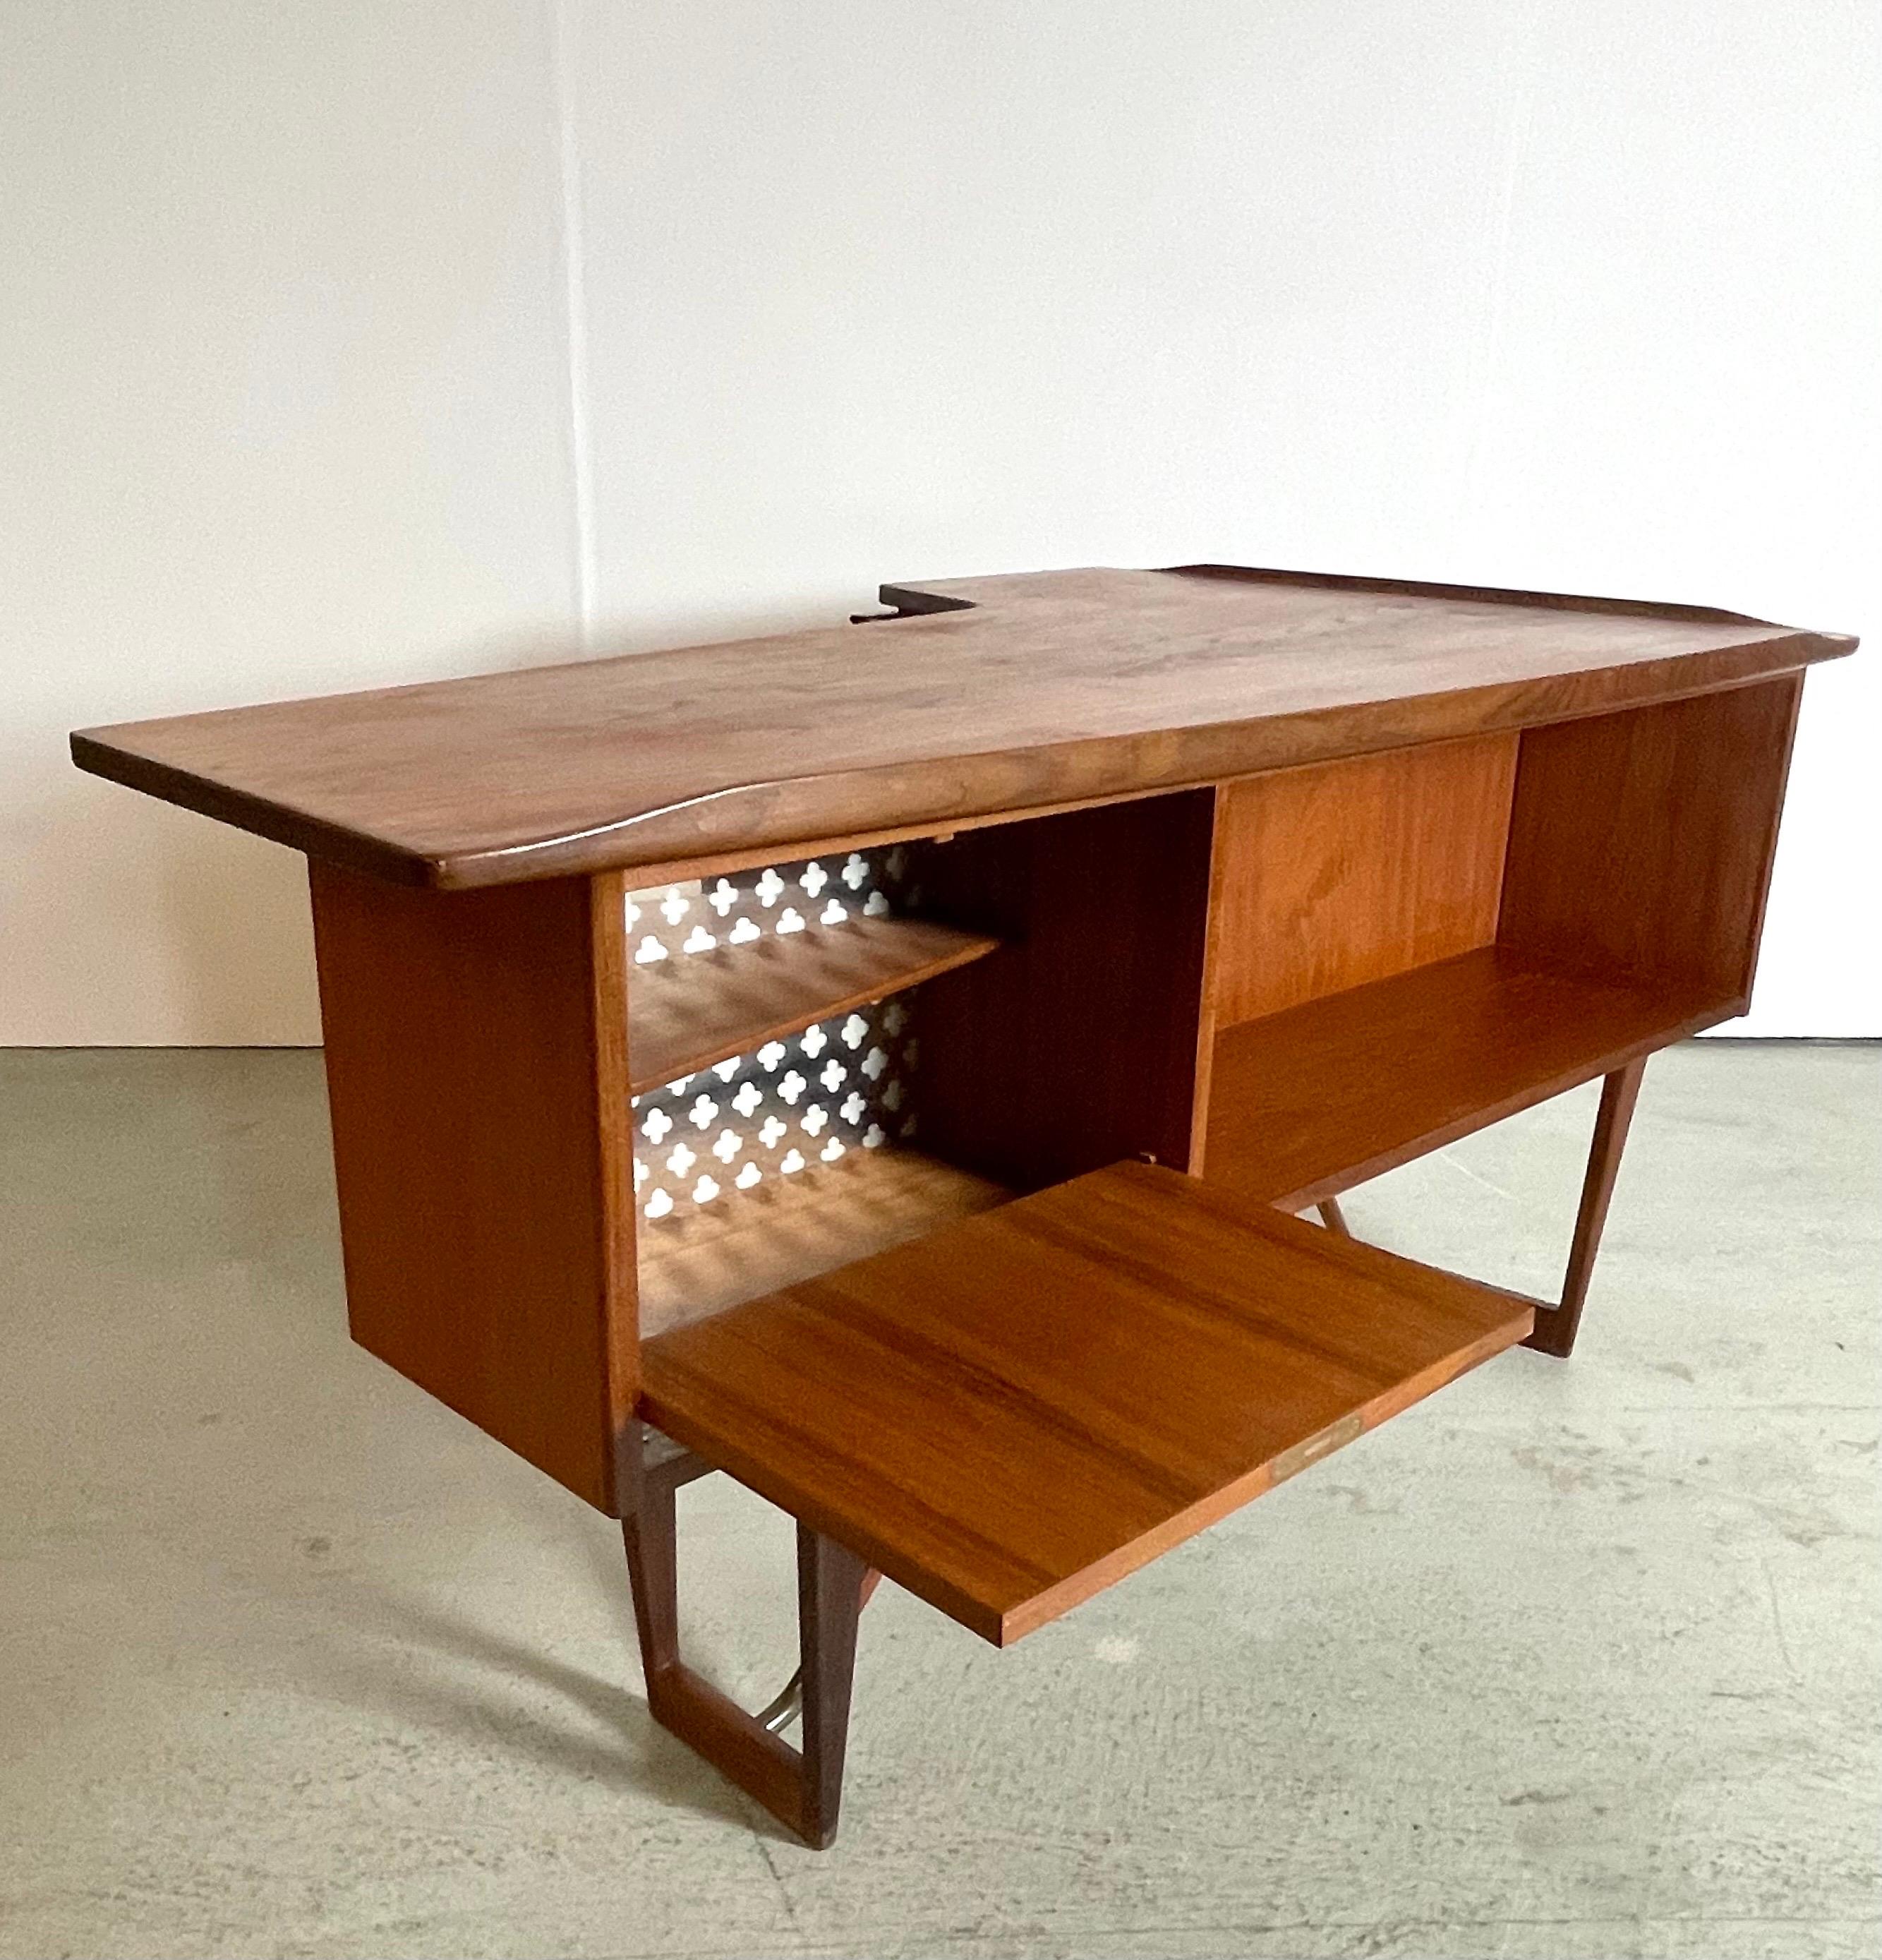 A very special desk designed by Peter Løvig Nielsen. Made in Denmark, produced by Hedensted Møbelfabrik. It features a boomerang shaped table top with raised edges, three drawers in the front side and a cabinet and open space in the backside. It can